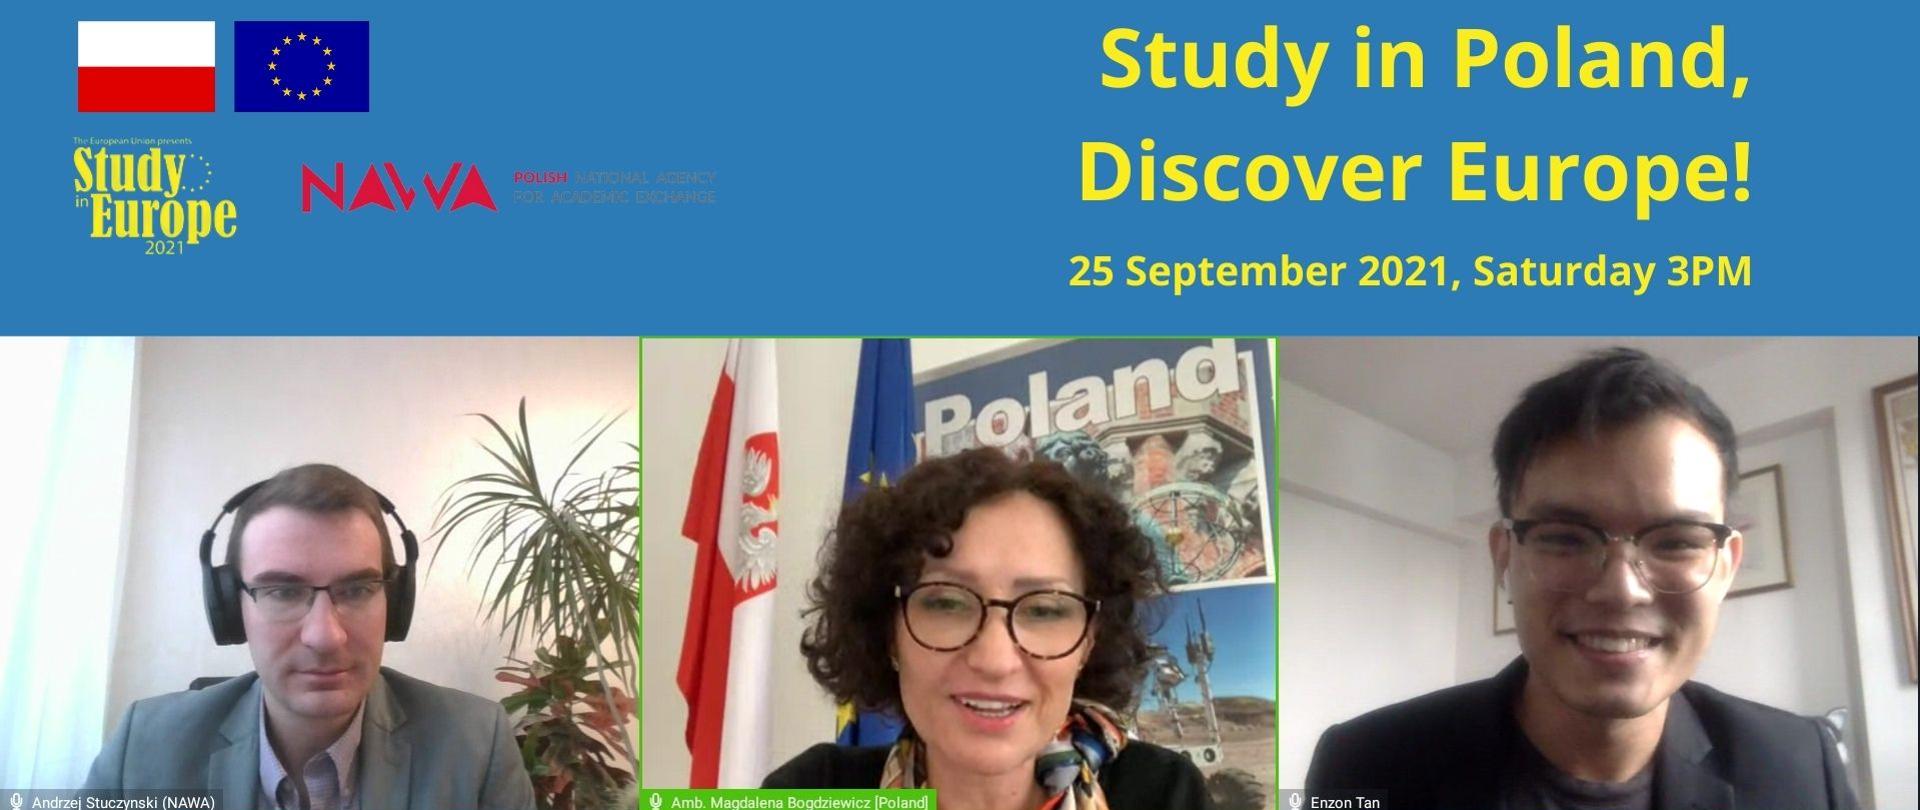 Study in Poland, Discover Europe Webinar in Singapore 2021